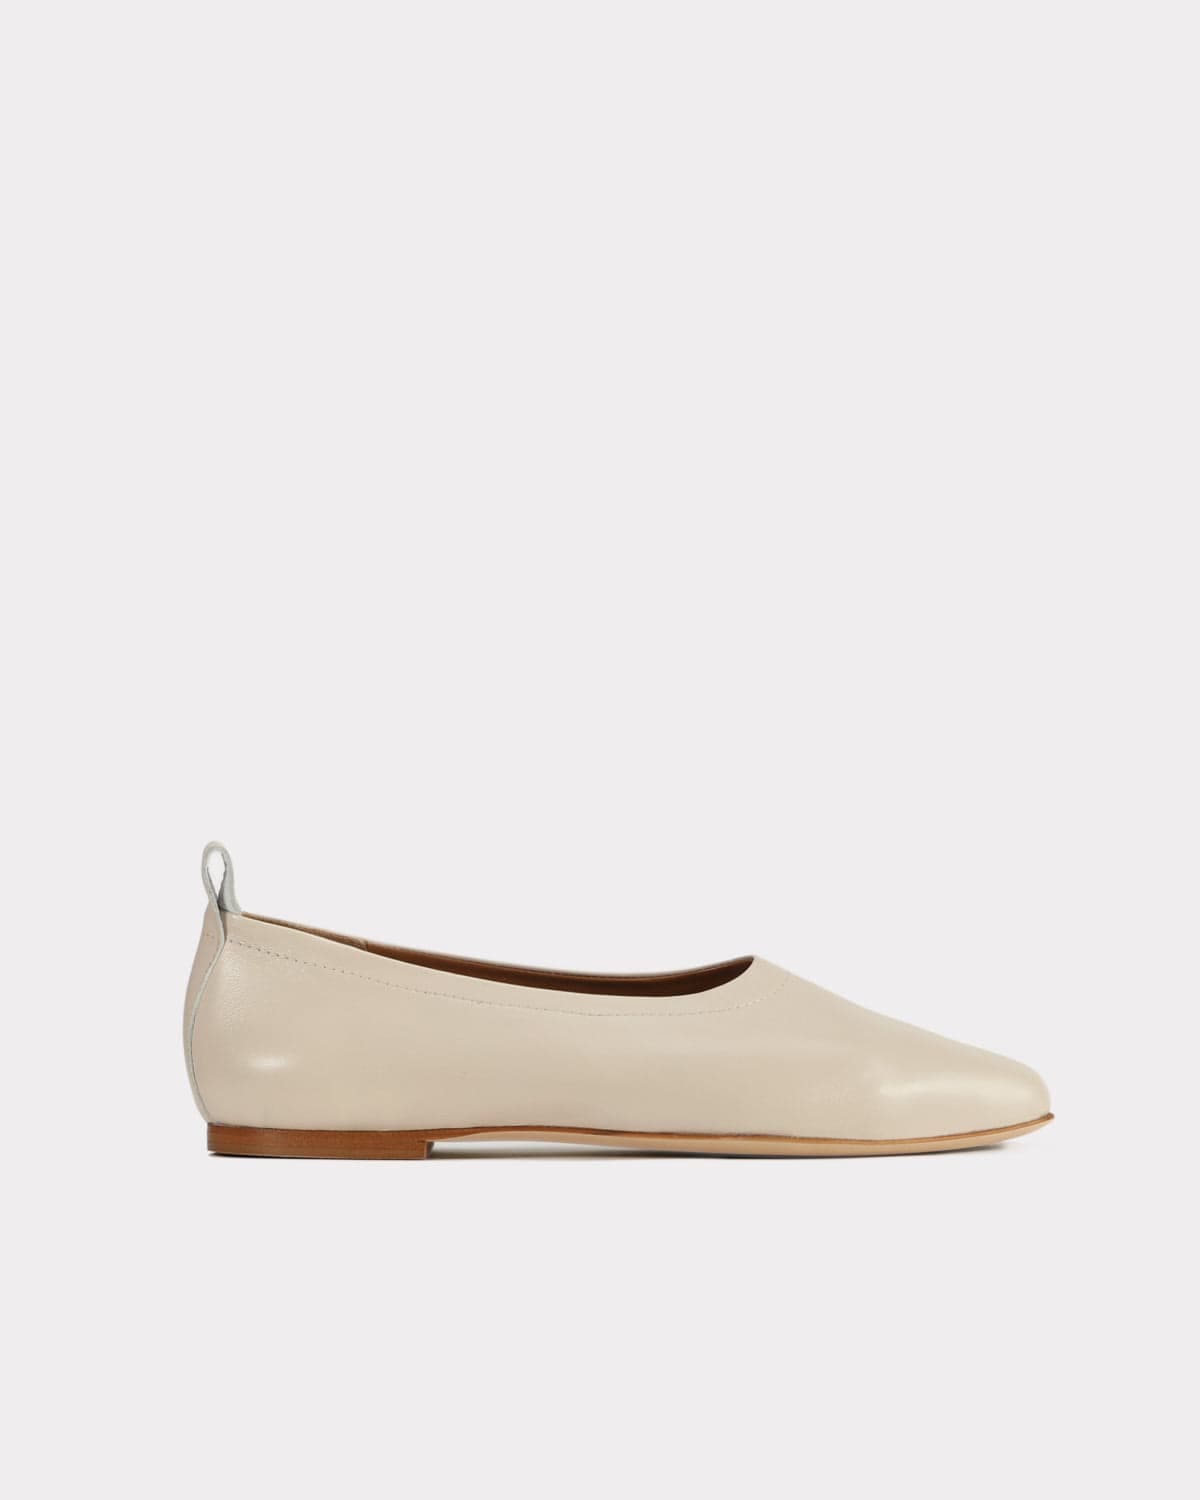 The Foundation Flat | Ivory Flats - Premium Handcrafted Shoes– ESSĒN